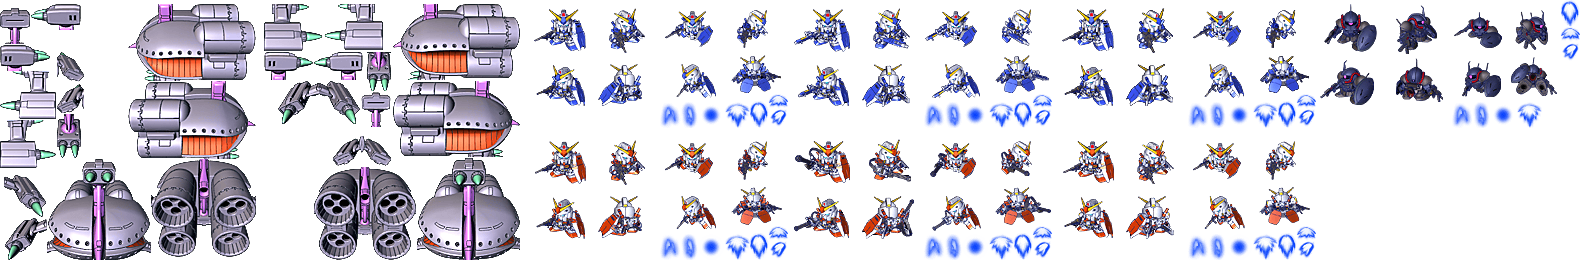 SD Gundam G Generation Spirits - Space At The End Of The Flash Units